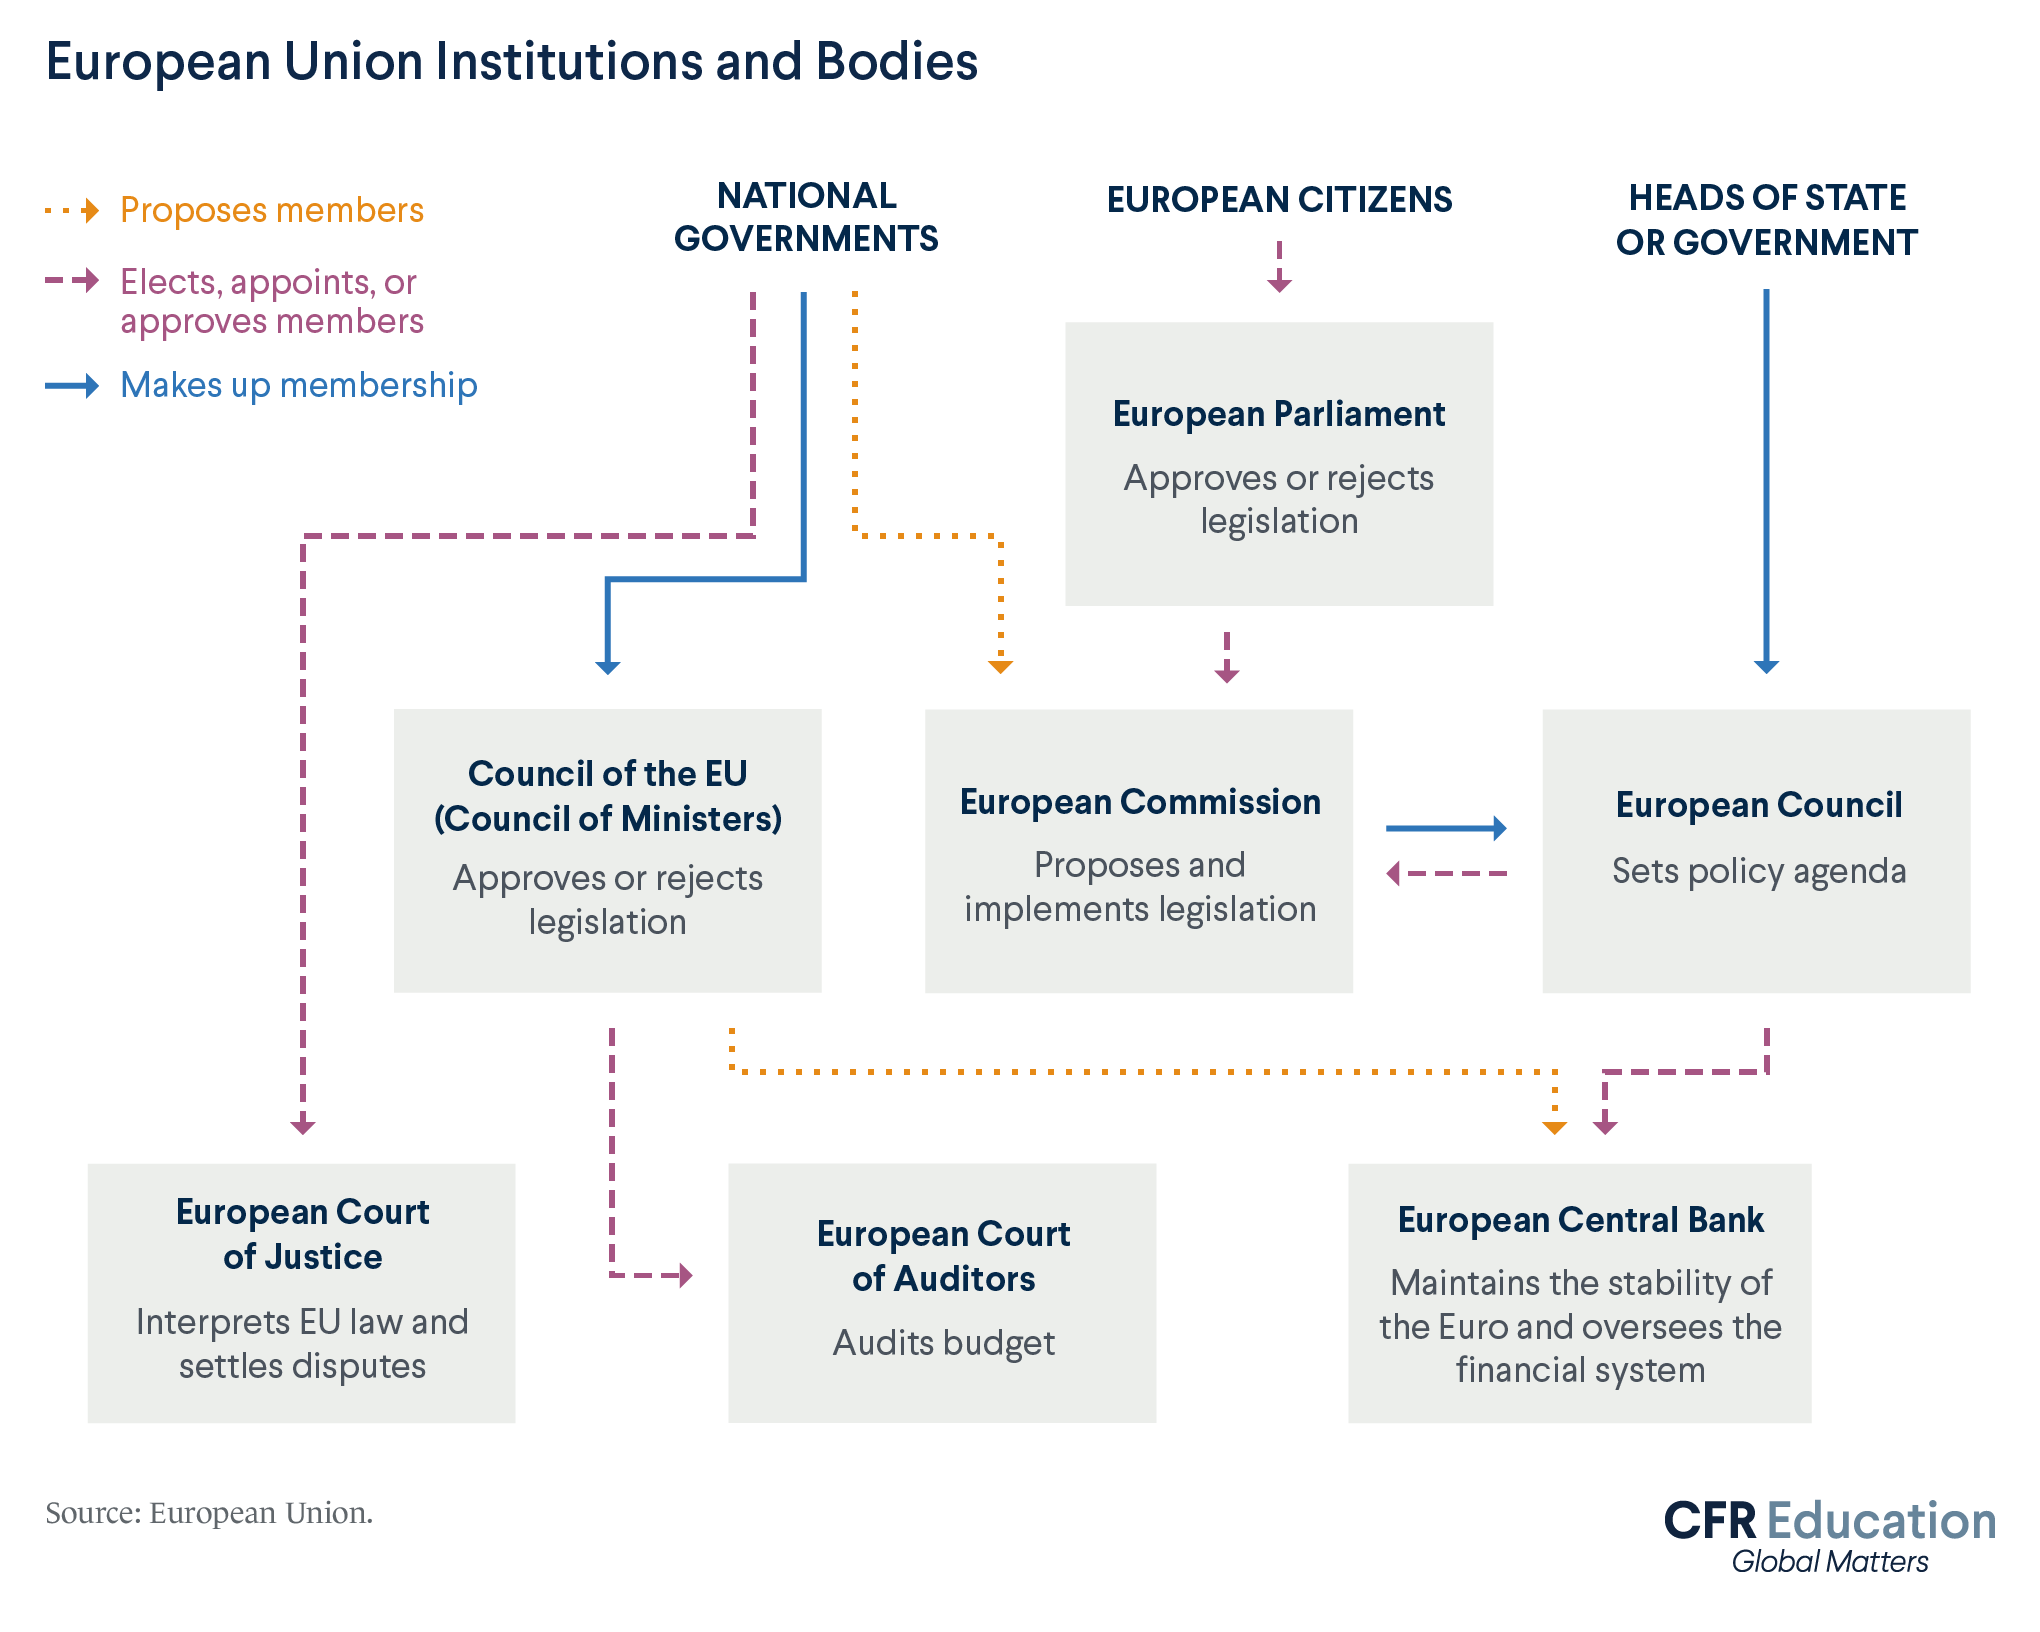 Infographic illustrating the EU's bodies: European Parliament, Council of the E.U., European Commission, European Council, European Court of Justice, European Court of Auditors, European Central Bank. For more info contact us at cfr_education@cfr.org.